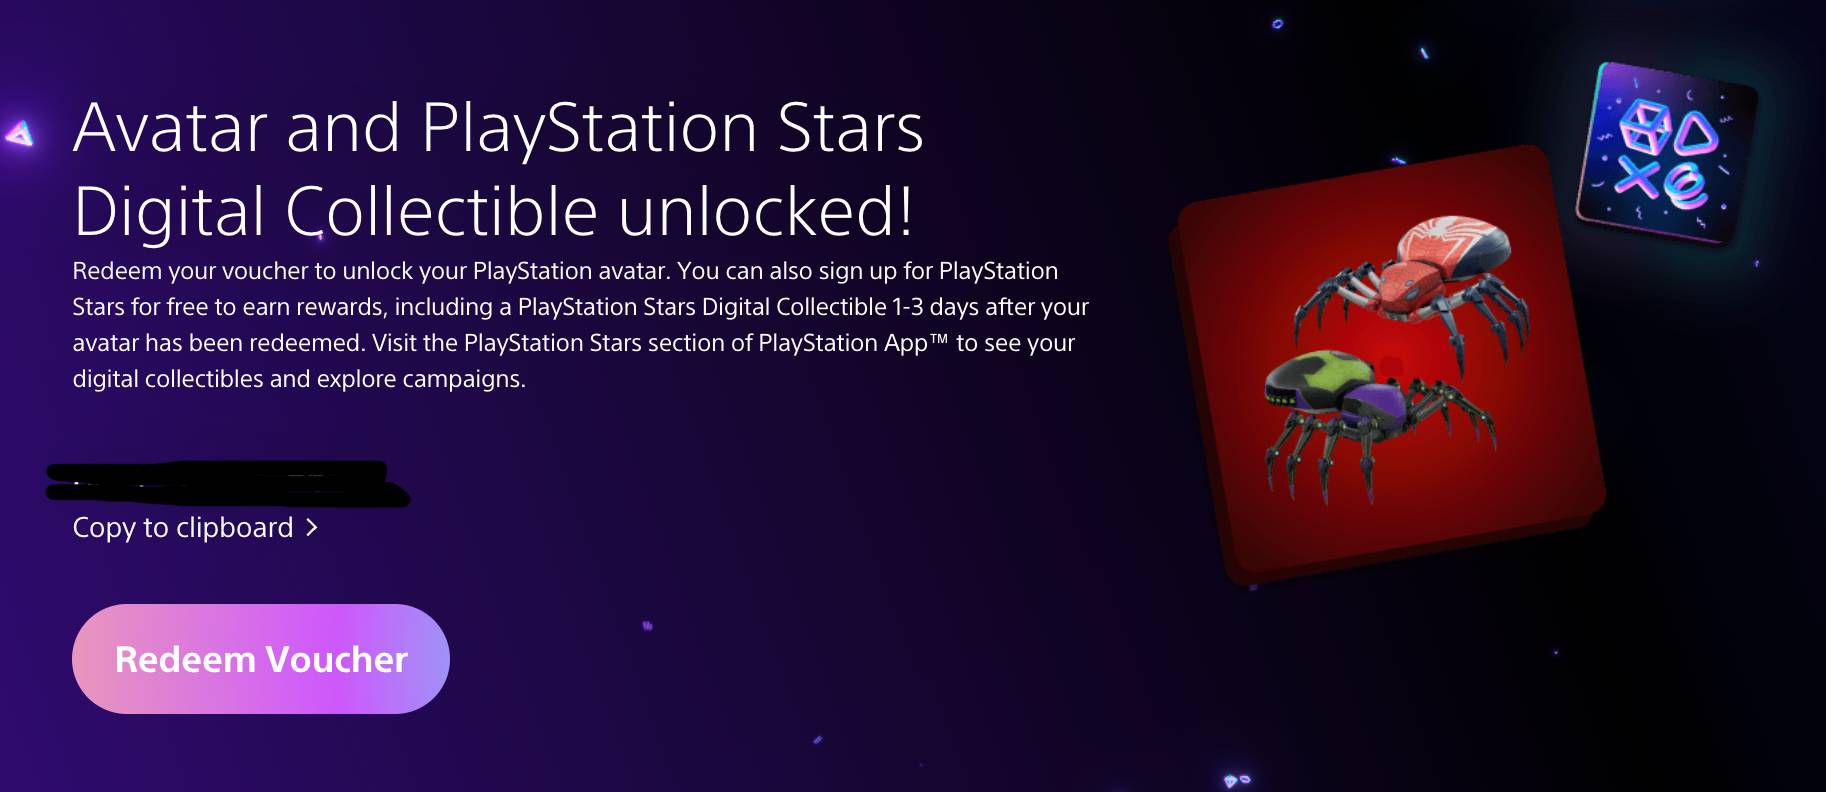 How to Access PlayStation Stars on PS4, PS5, PC, iPhone, and